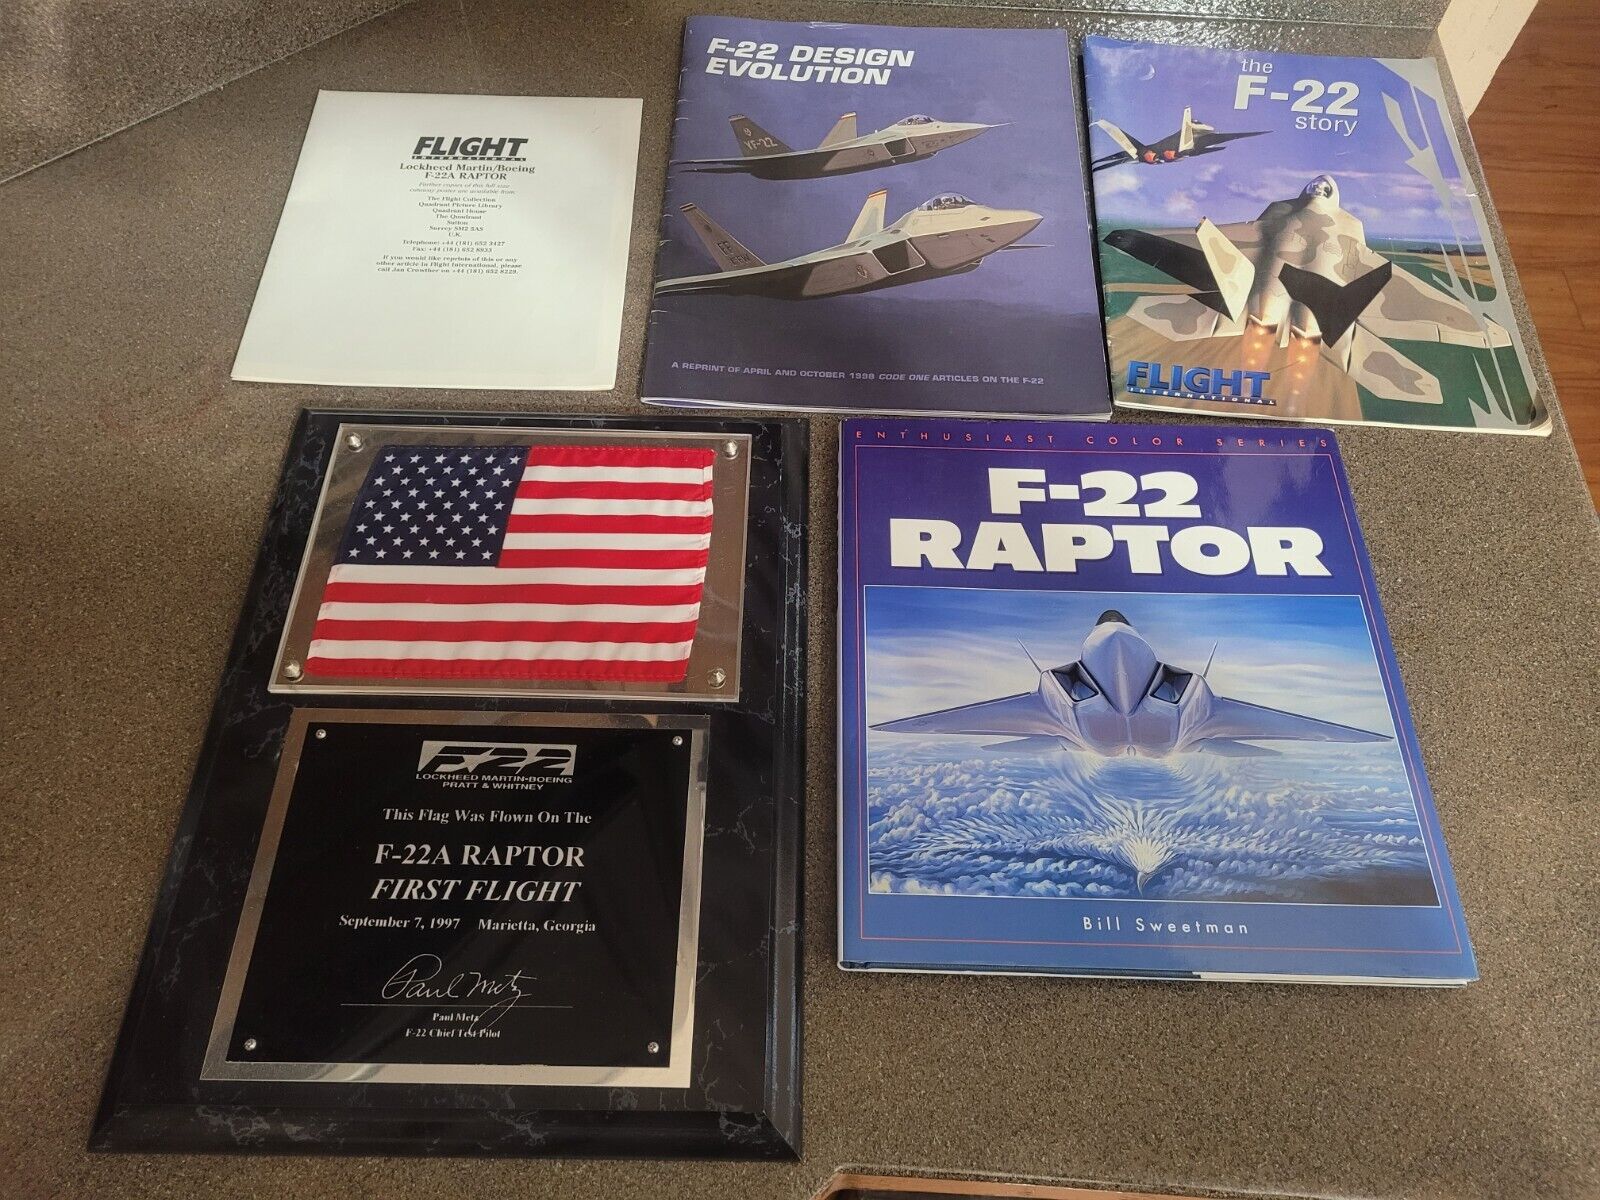 Lockheed Martin Boeing F-22 First Flight Flag Plaque and Raptor books poster lot